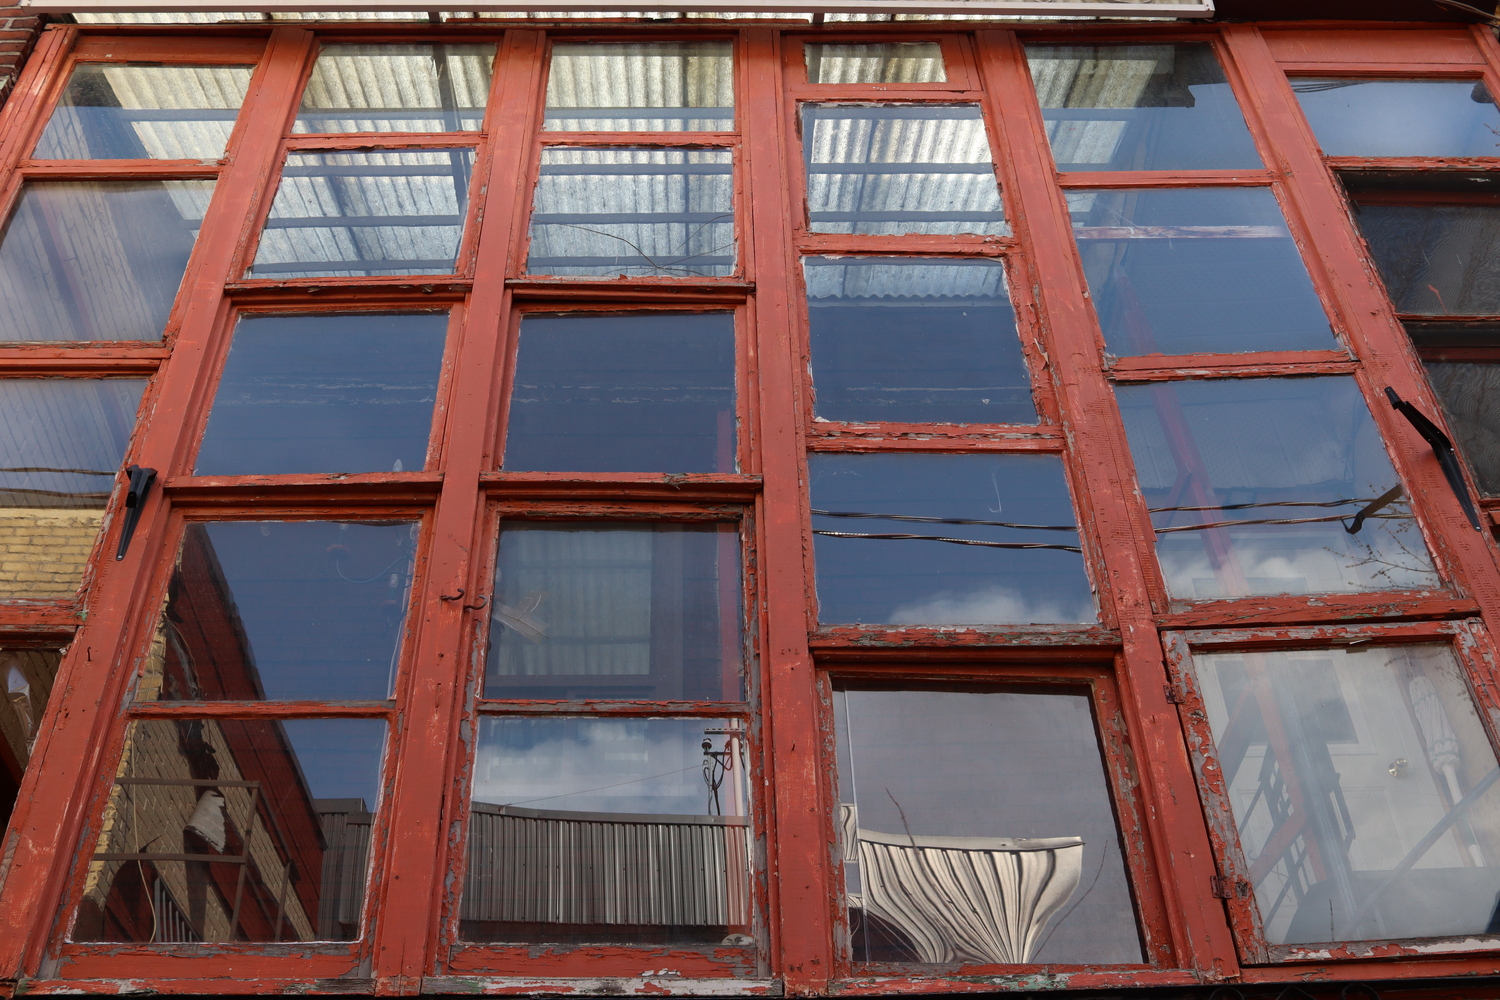 an uneven grid of old wooden-framed windows in an alley.
the red paint on the frames is peeling badly,
completely stripped in some spots.
in the reflections of the lower windows
we see the roofs of the opposite buildings
and hints of clouds in the sky.